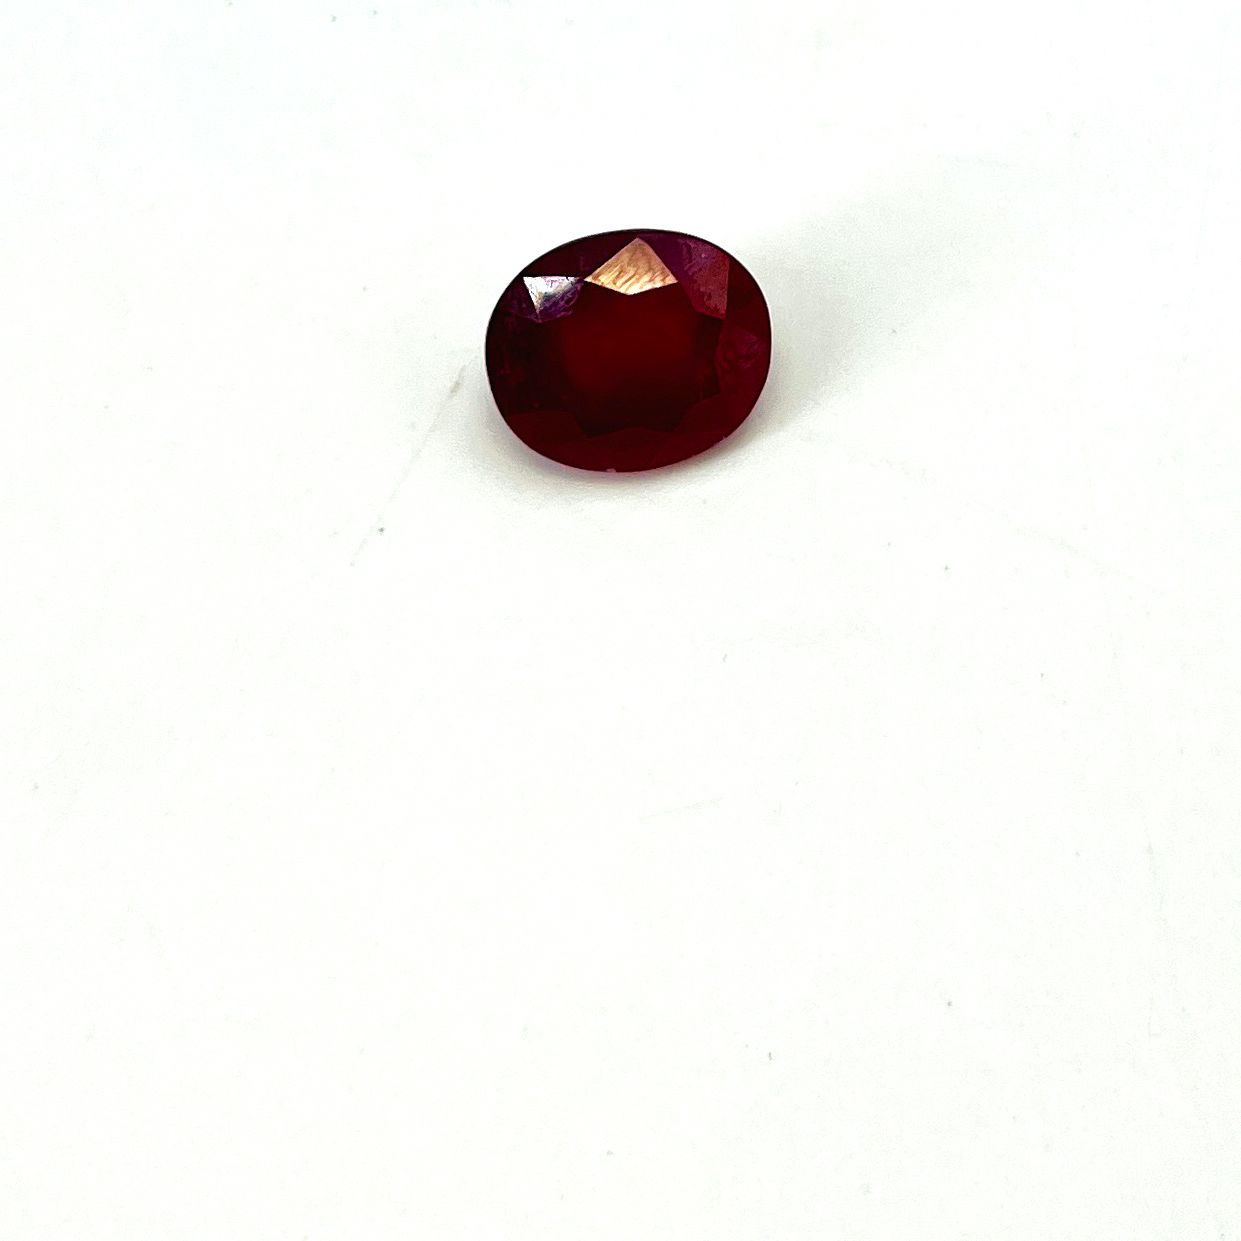 Null Oval treated ruby weighing 7.13 carats Dimensions: 1.2 x 1 cm